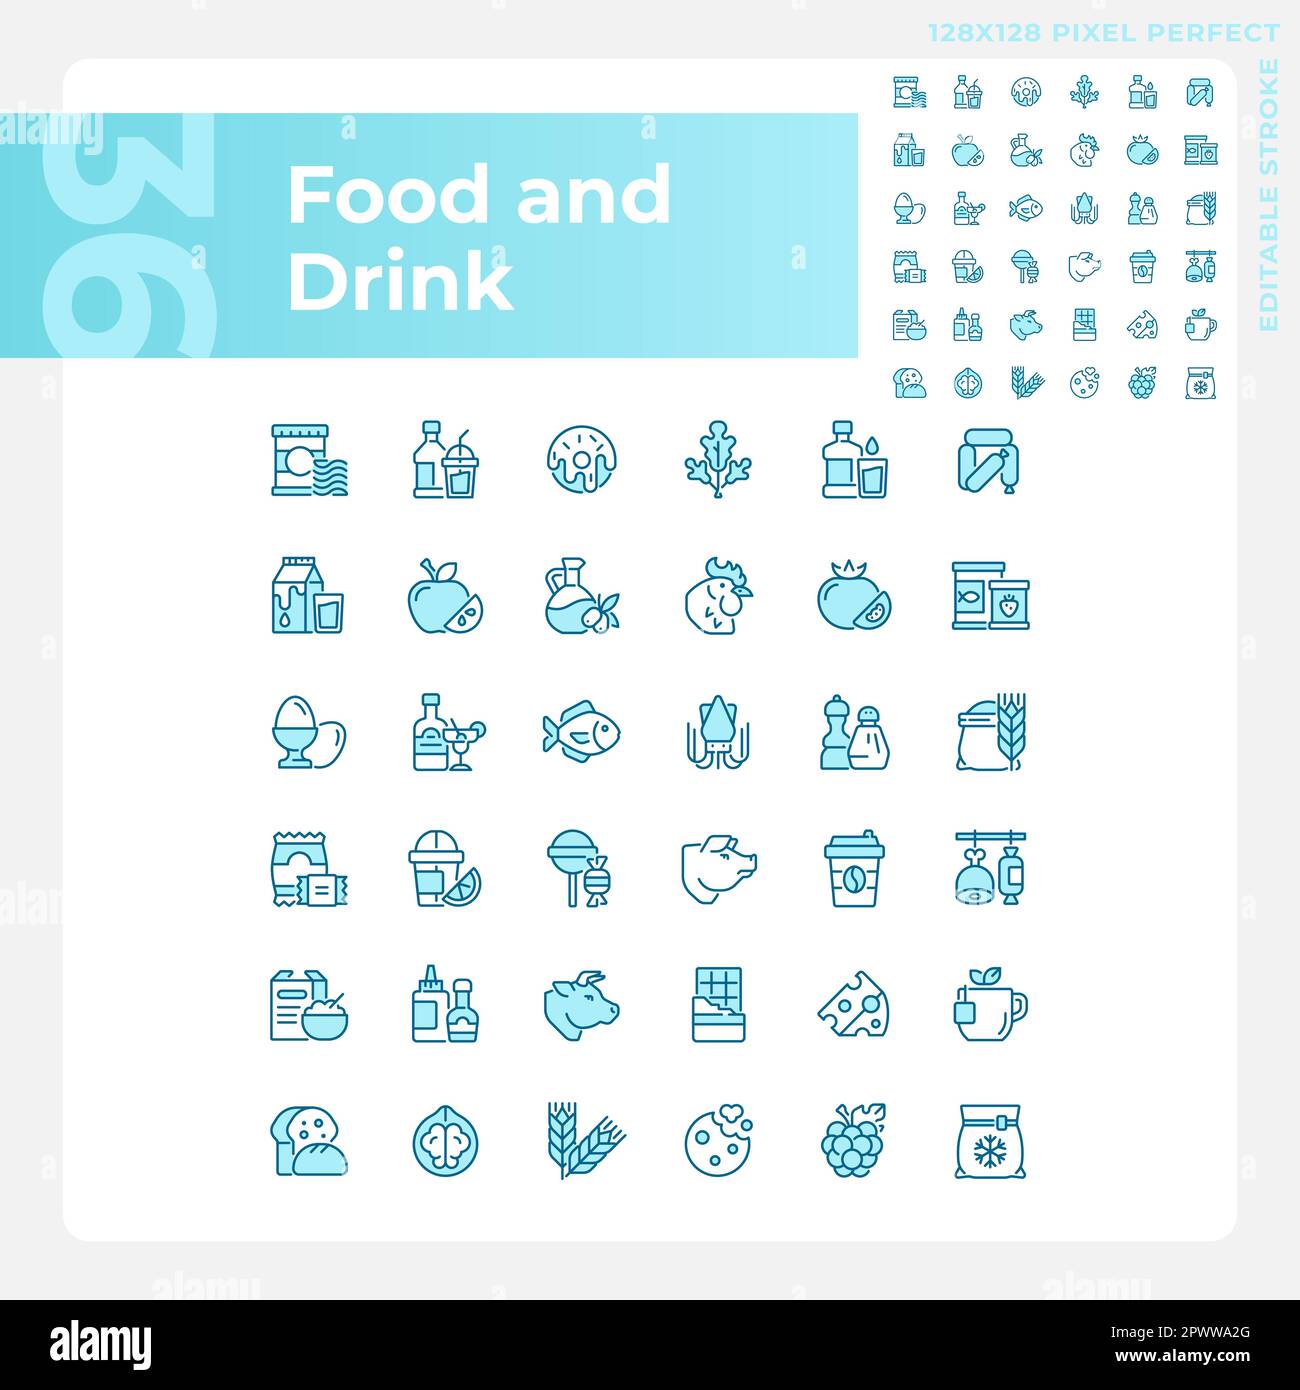 Food and drink pixel perfect blue RGB color icons set Stock Vector